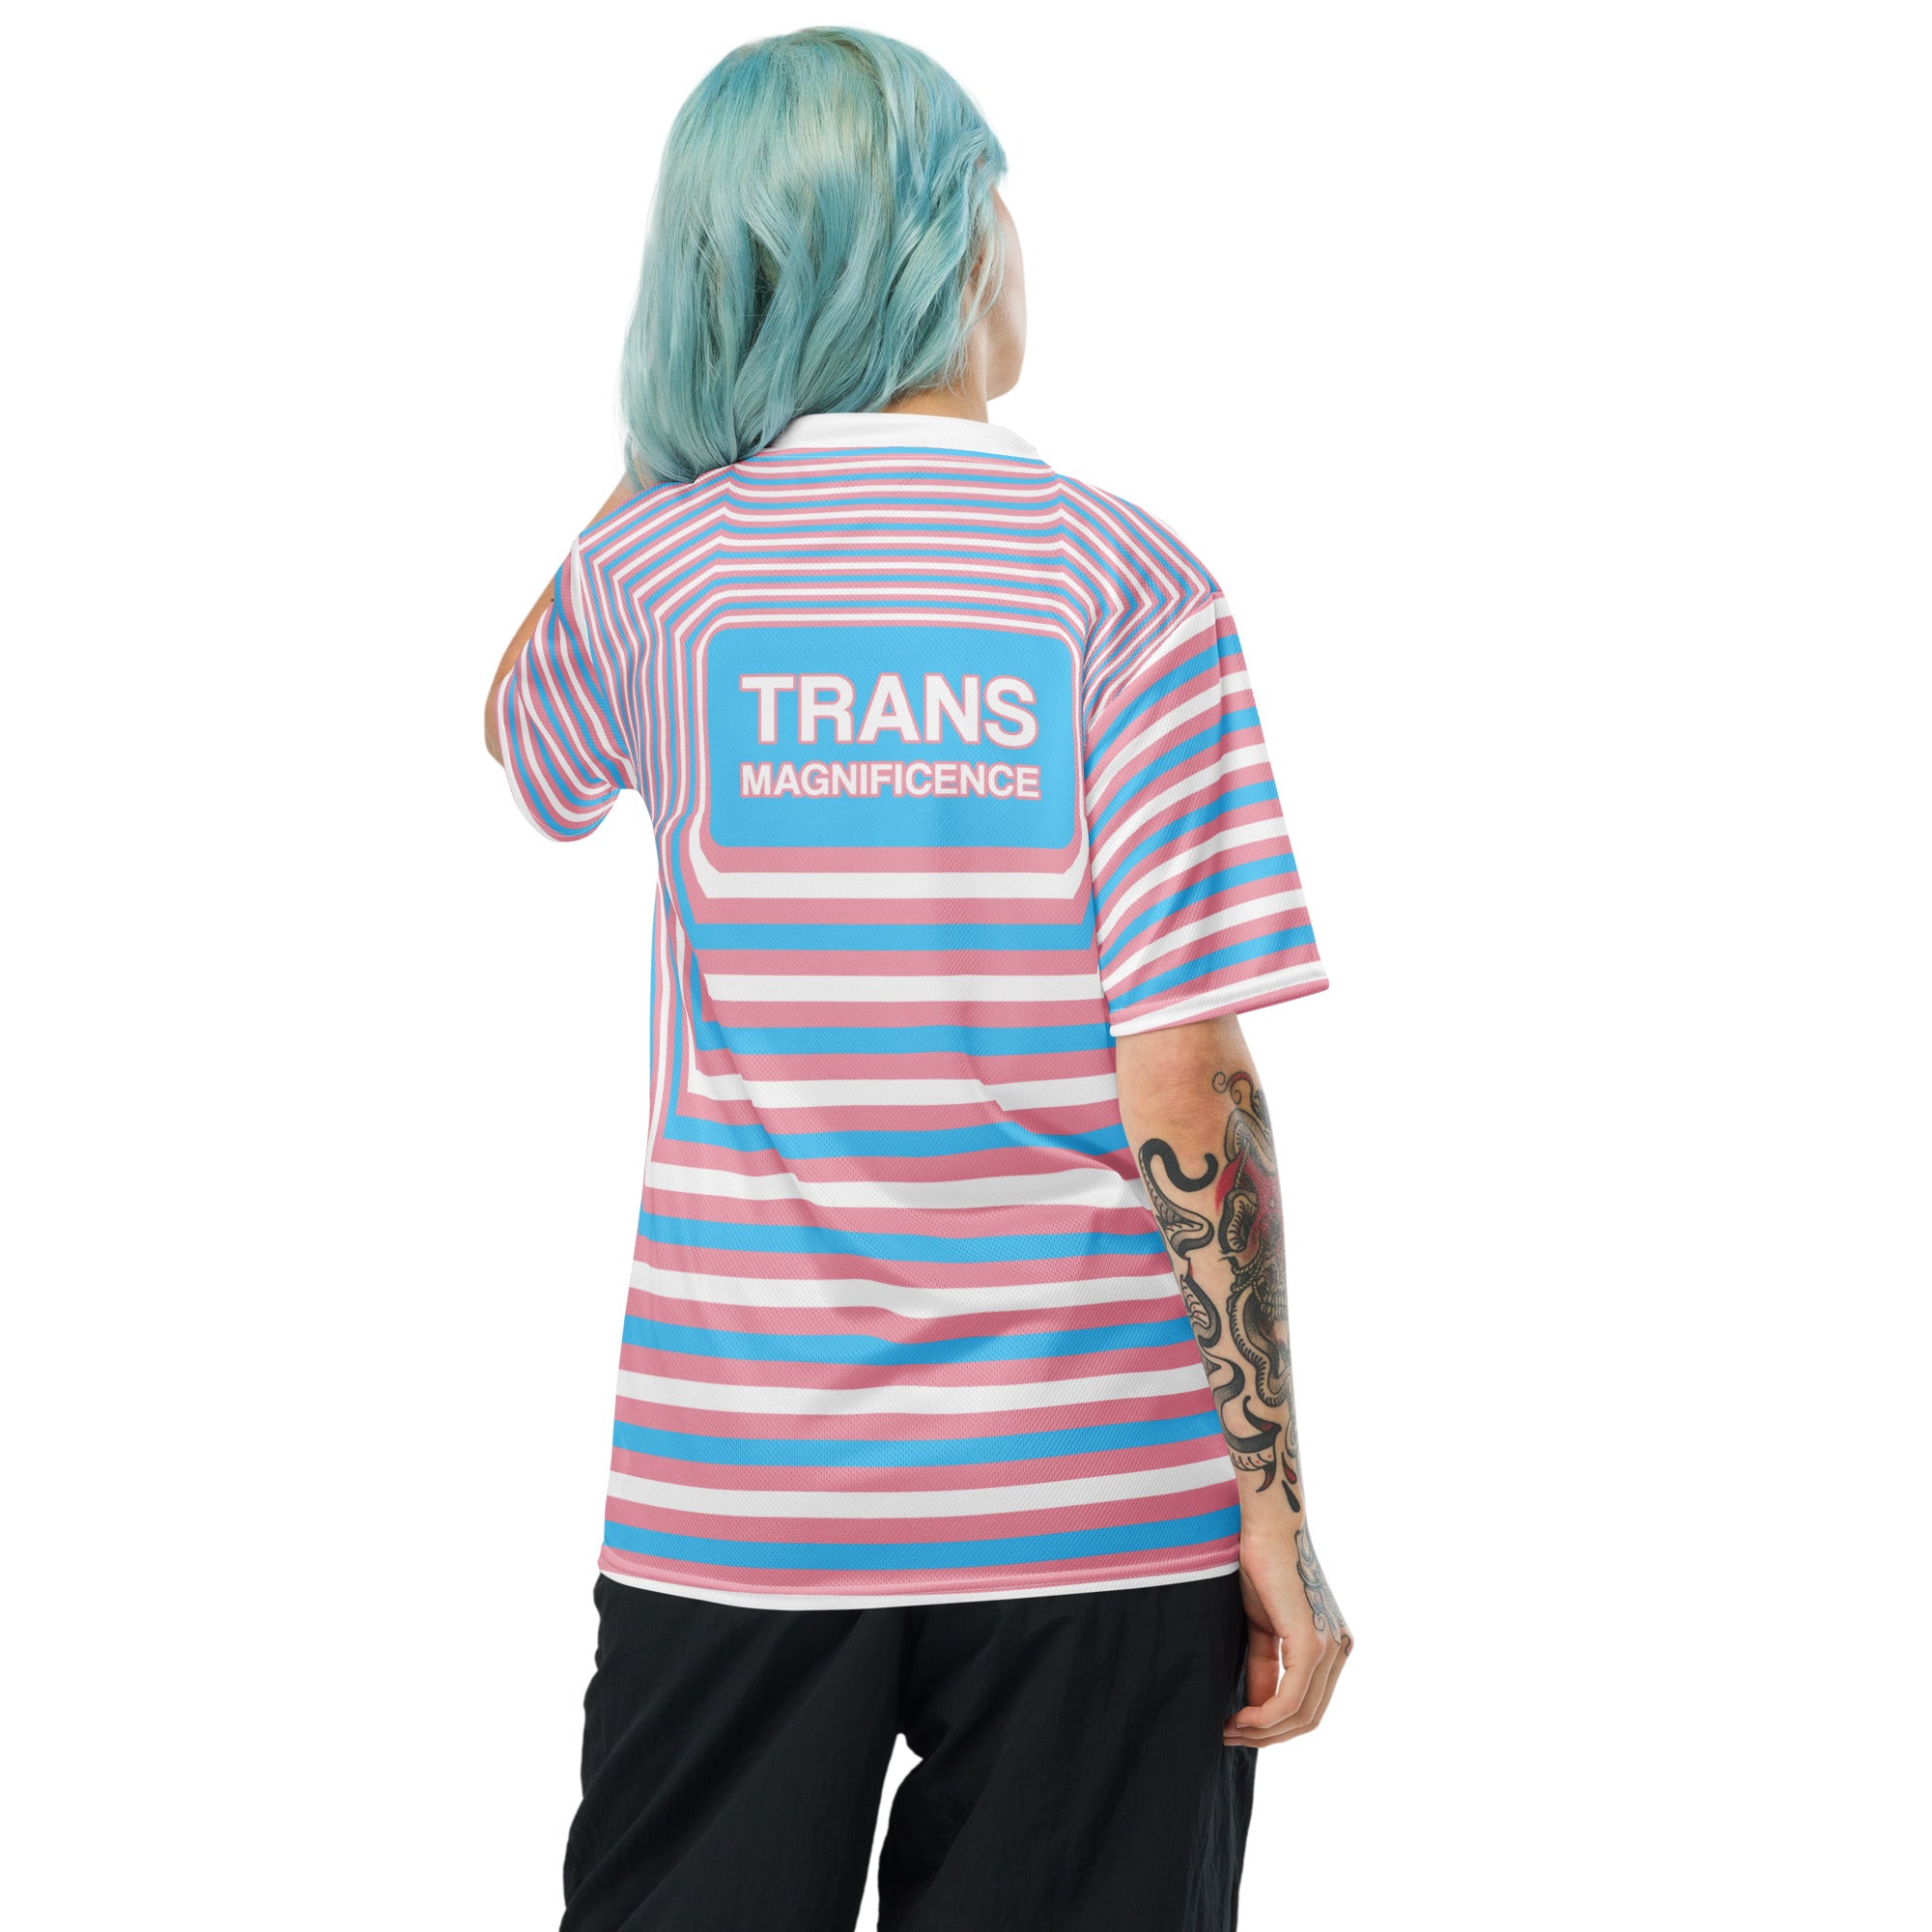 TransMagnificence Recycled Unisex Sports T Shirt